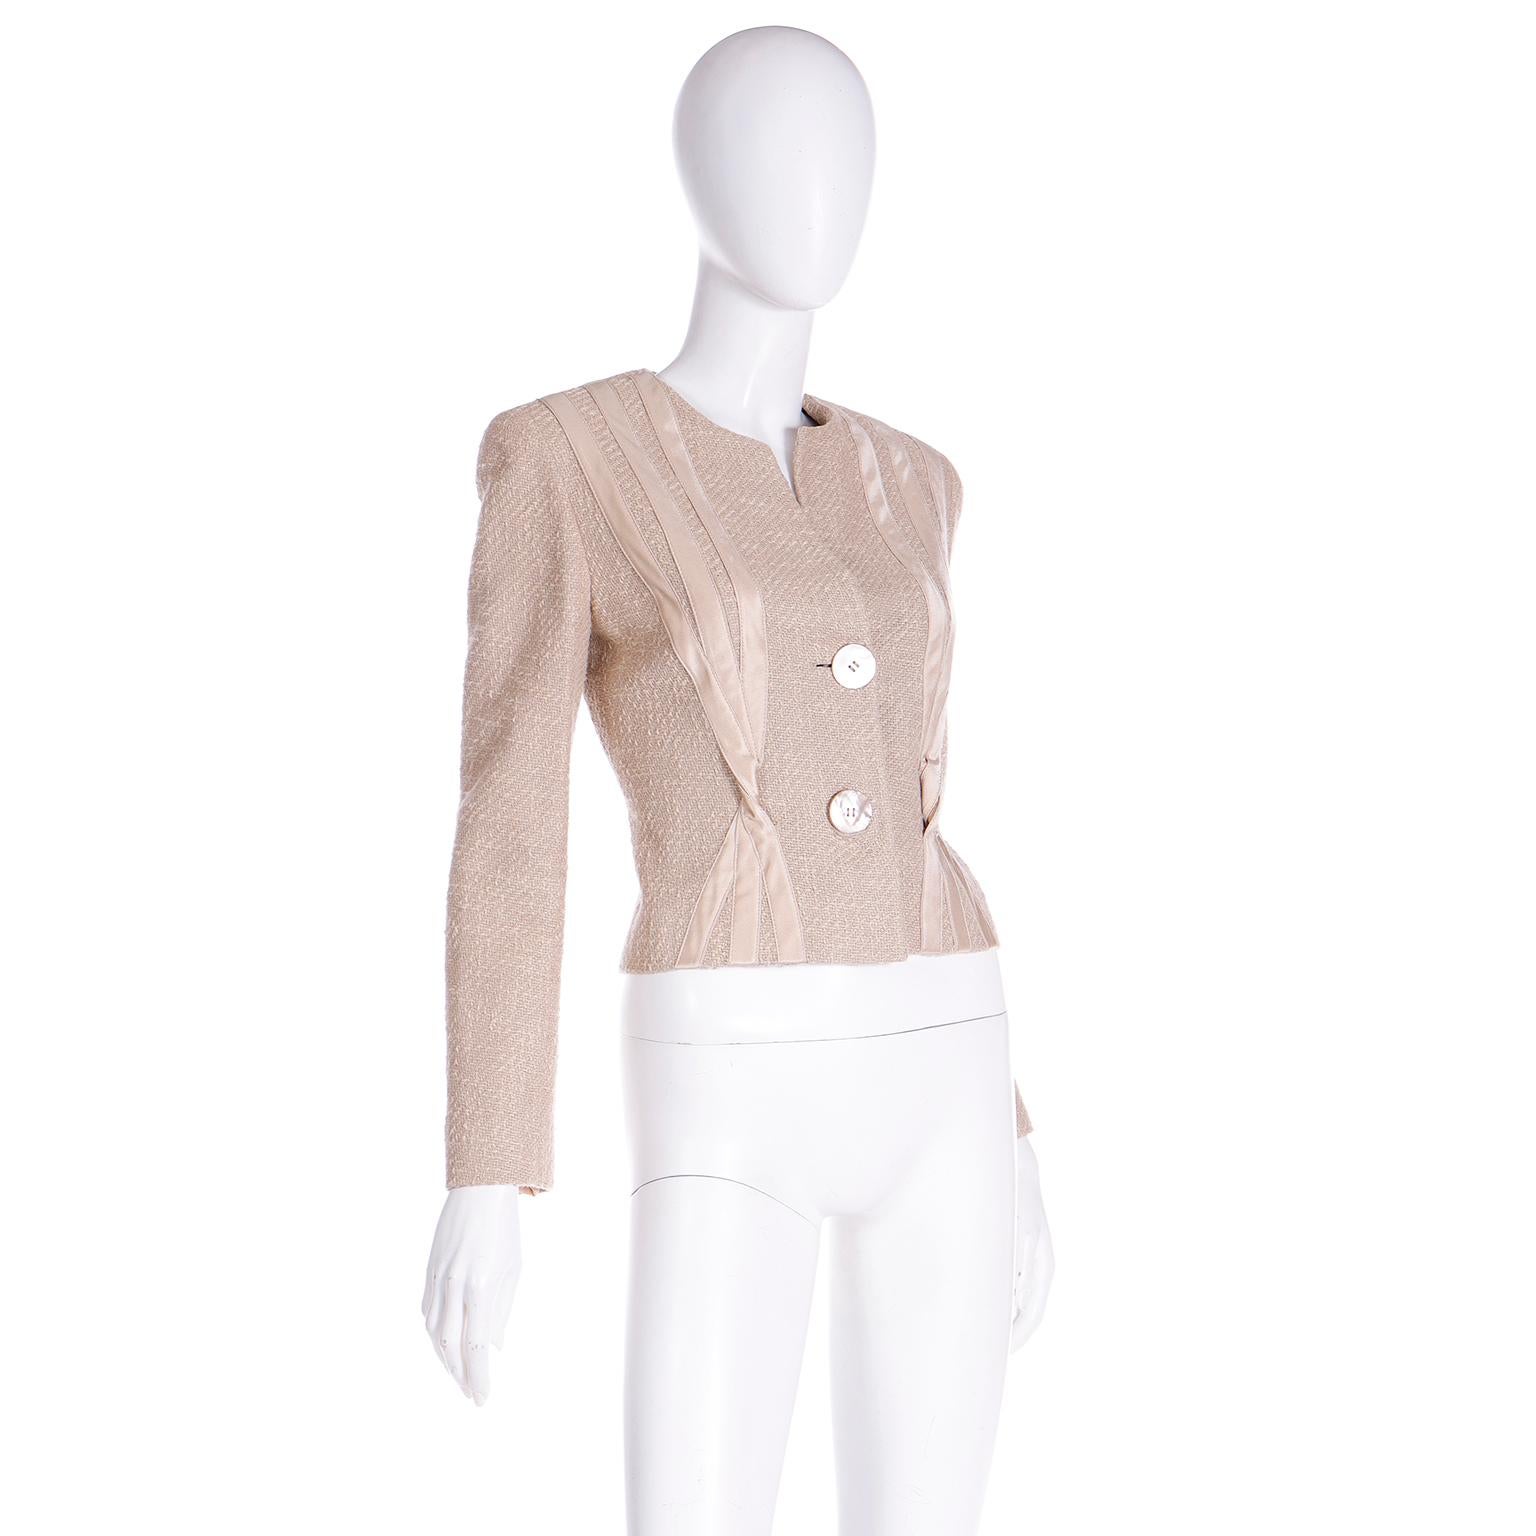 Valentino Creamy Sand Beige Cropped Nubby Linen Blend Jacket w Silk Ribbon In Excellent Condition For Sale In Portland, OR